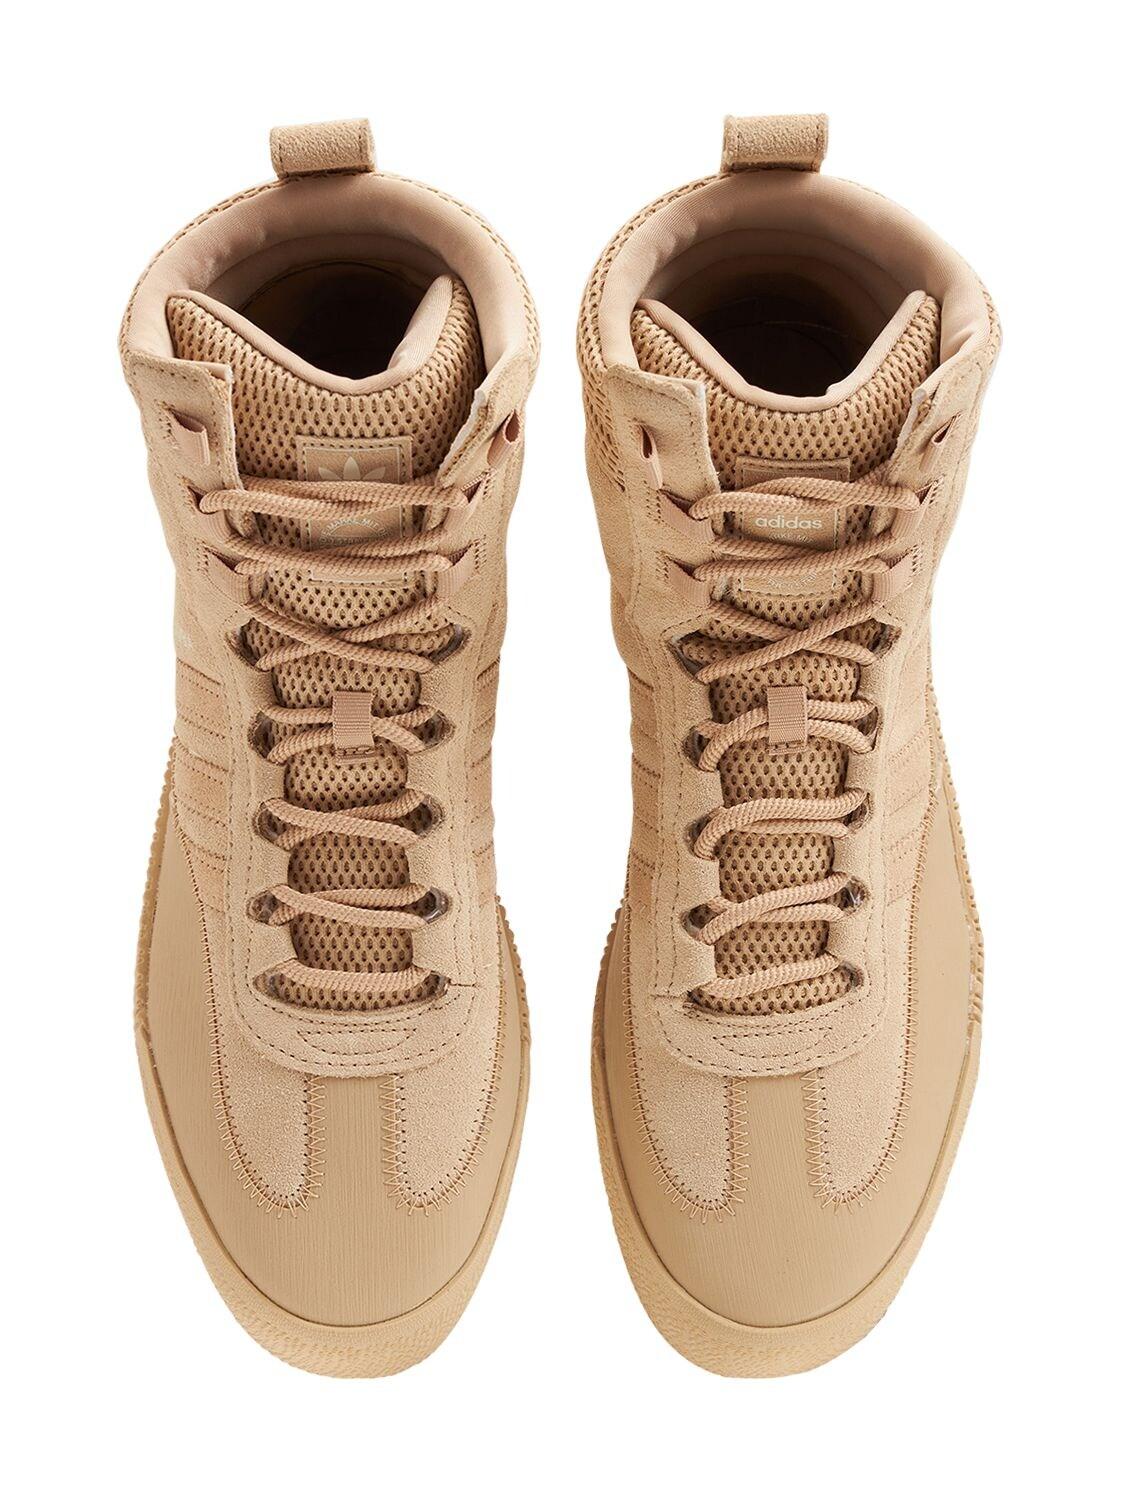 adidas Originals Samba Boots in Pale Nude (Natural) | Lyst